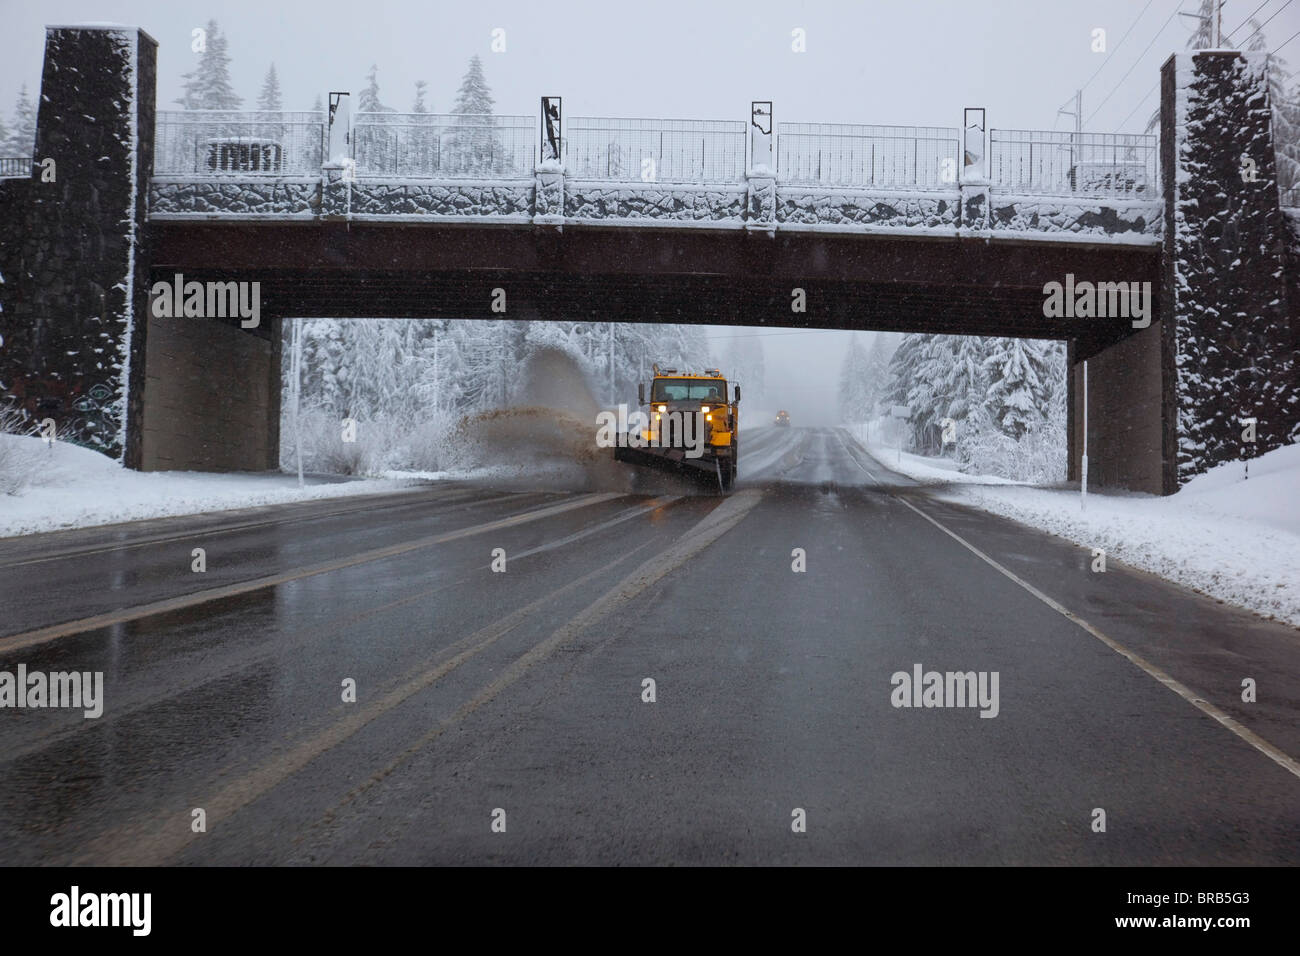 Spring Snow At Timberline On Mount Hood With A Snowplow On The Road; Oregon, United States Of America Stock Photo